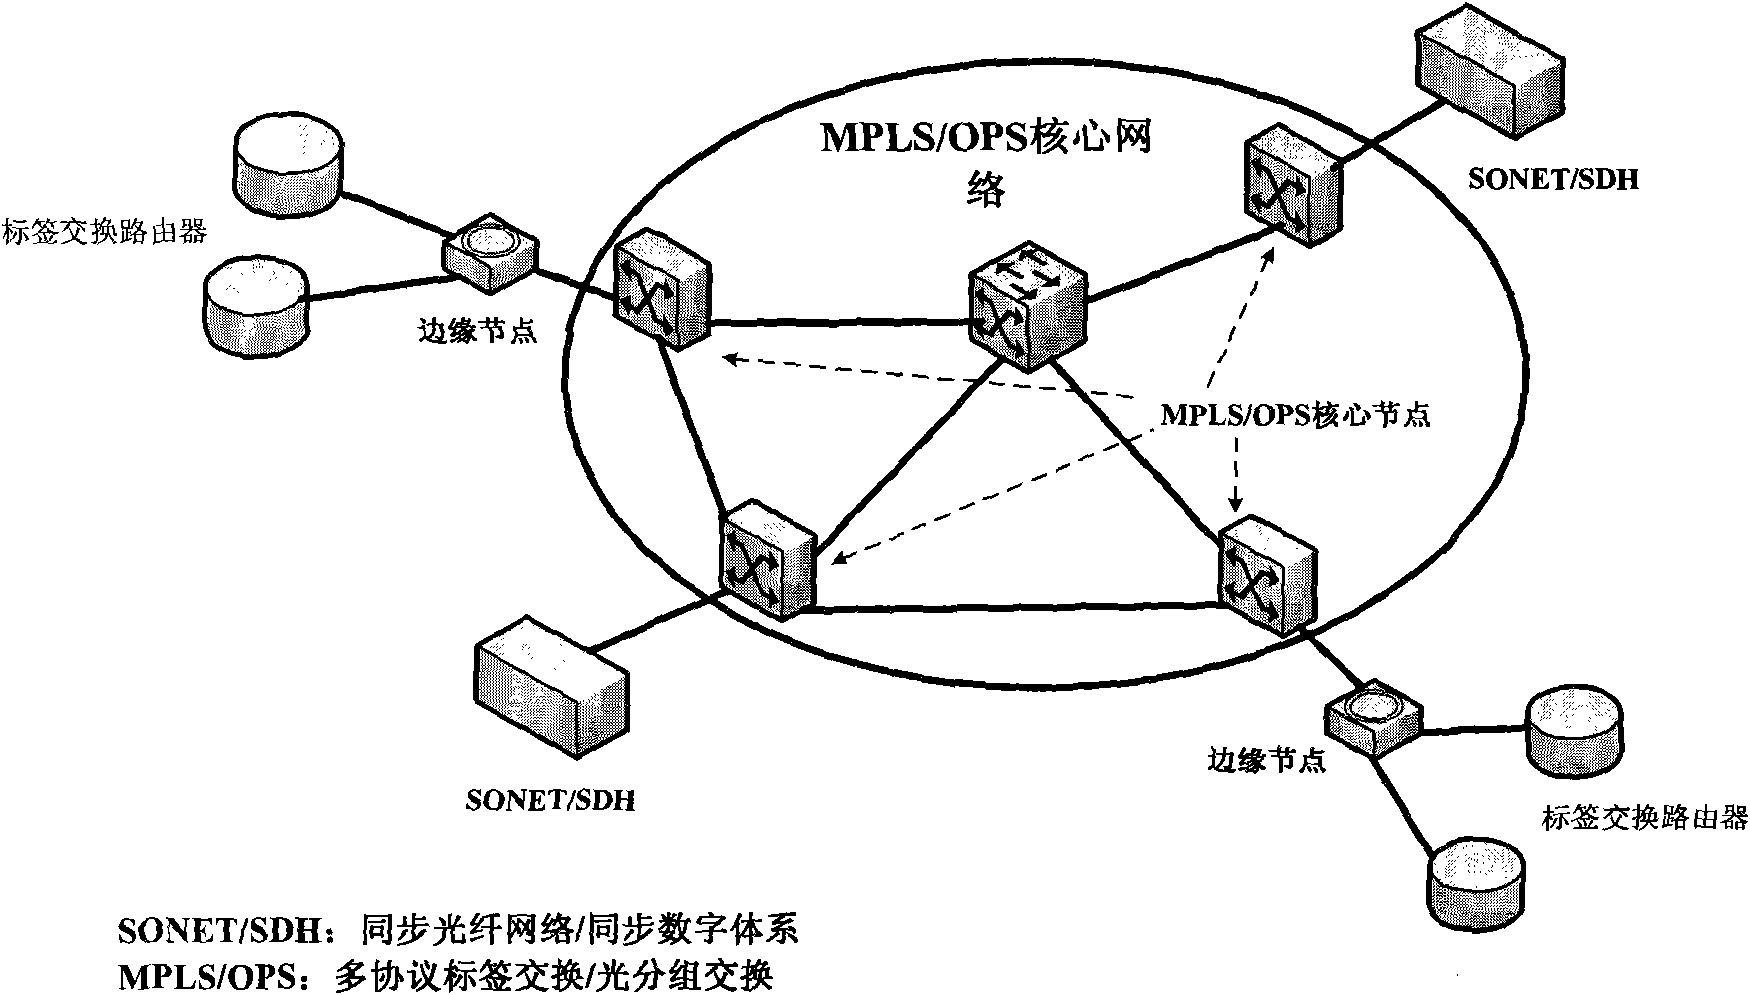 Virtual private network implementation method based on MPLS/OPS